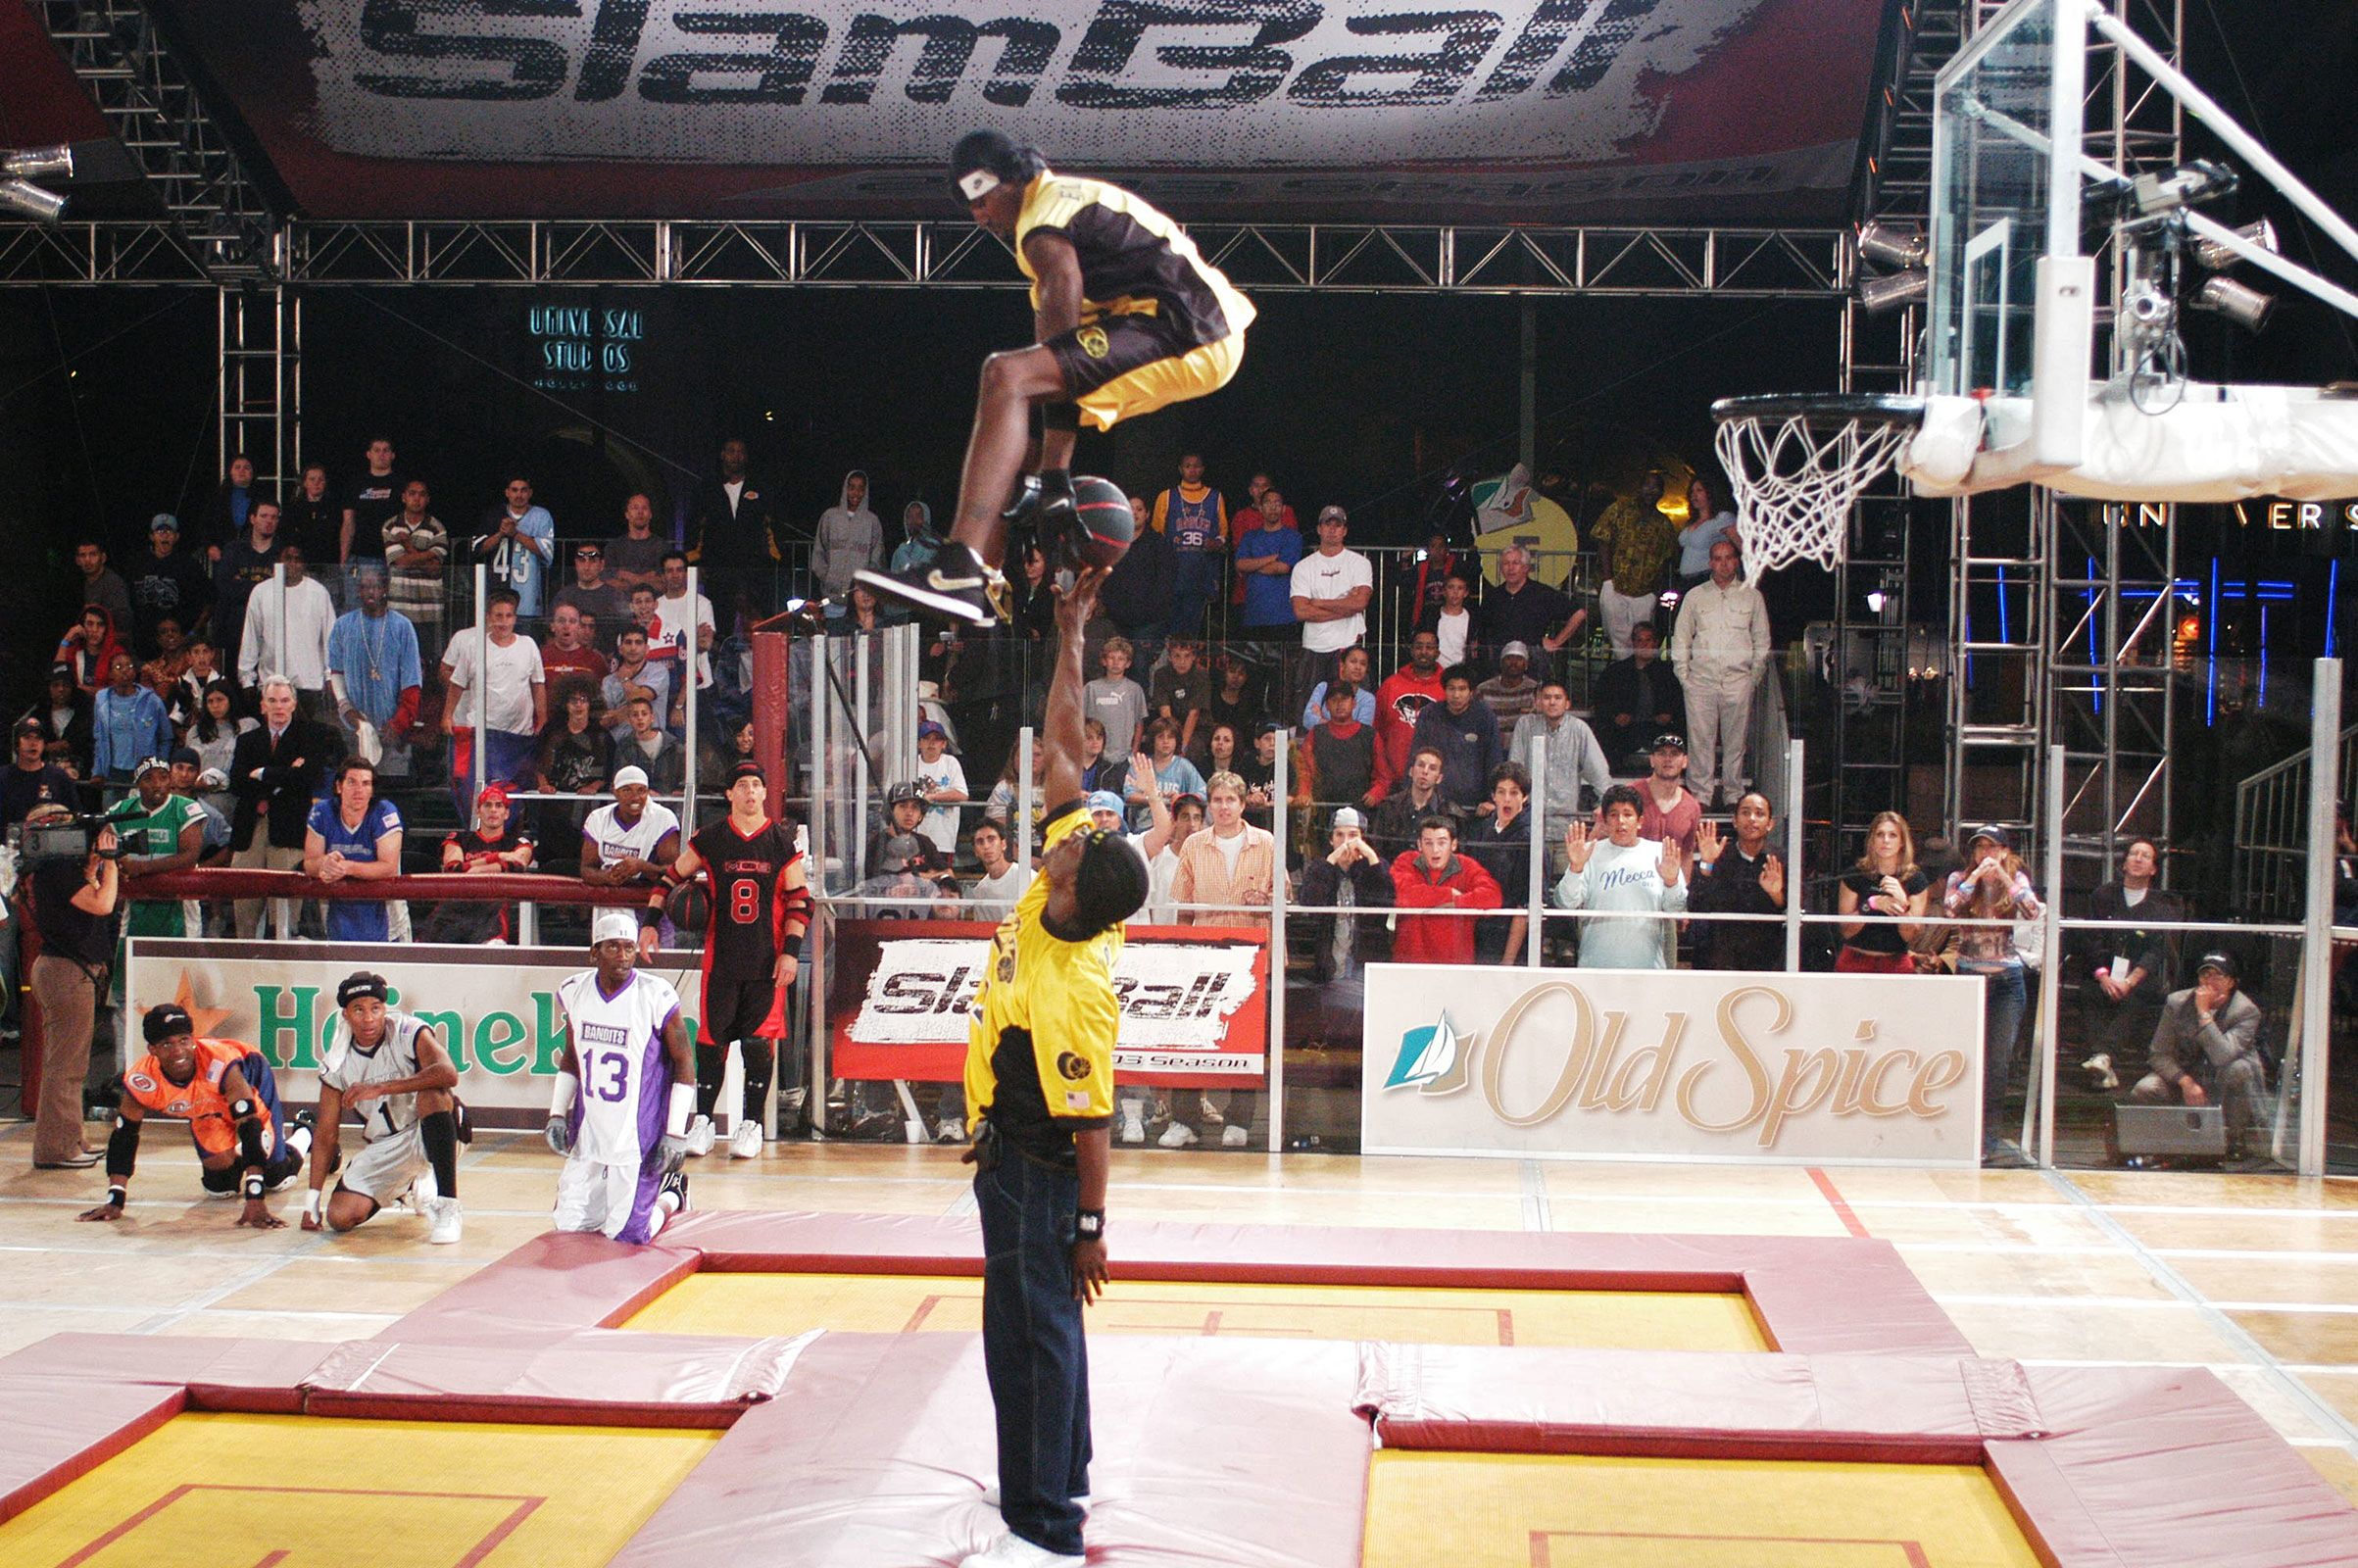 SlamBall Is Back. Can It Survive?